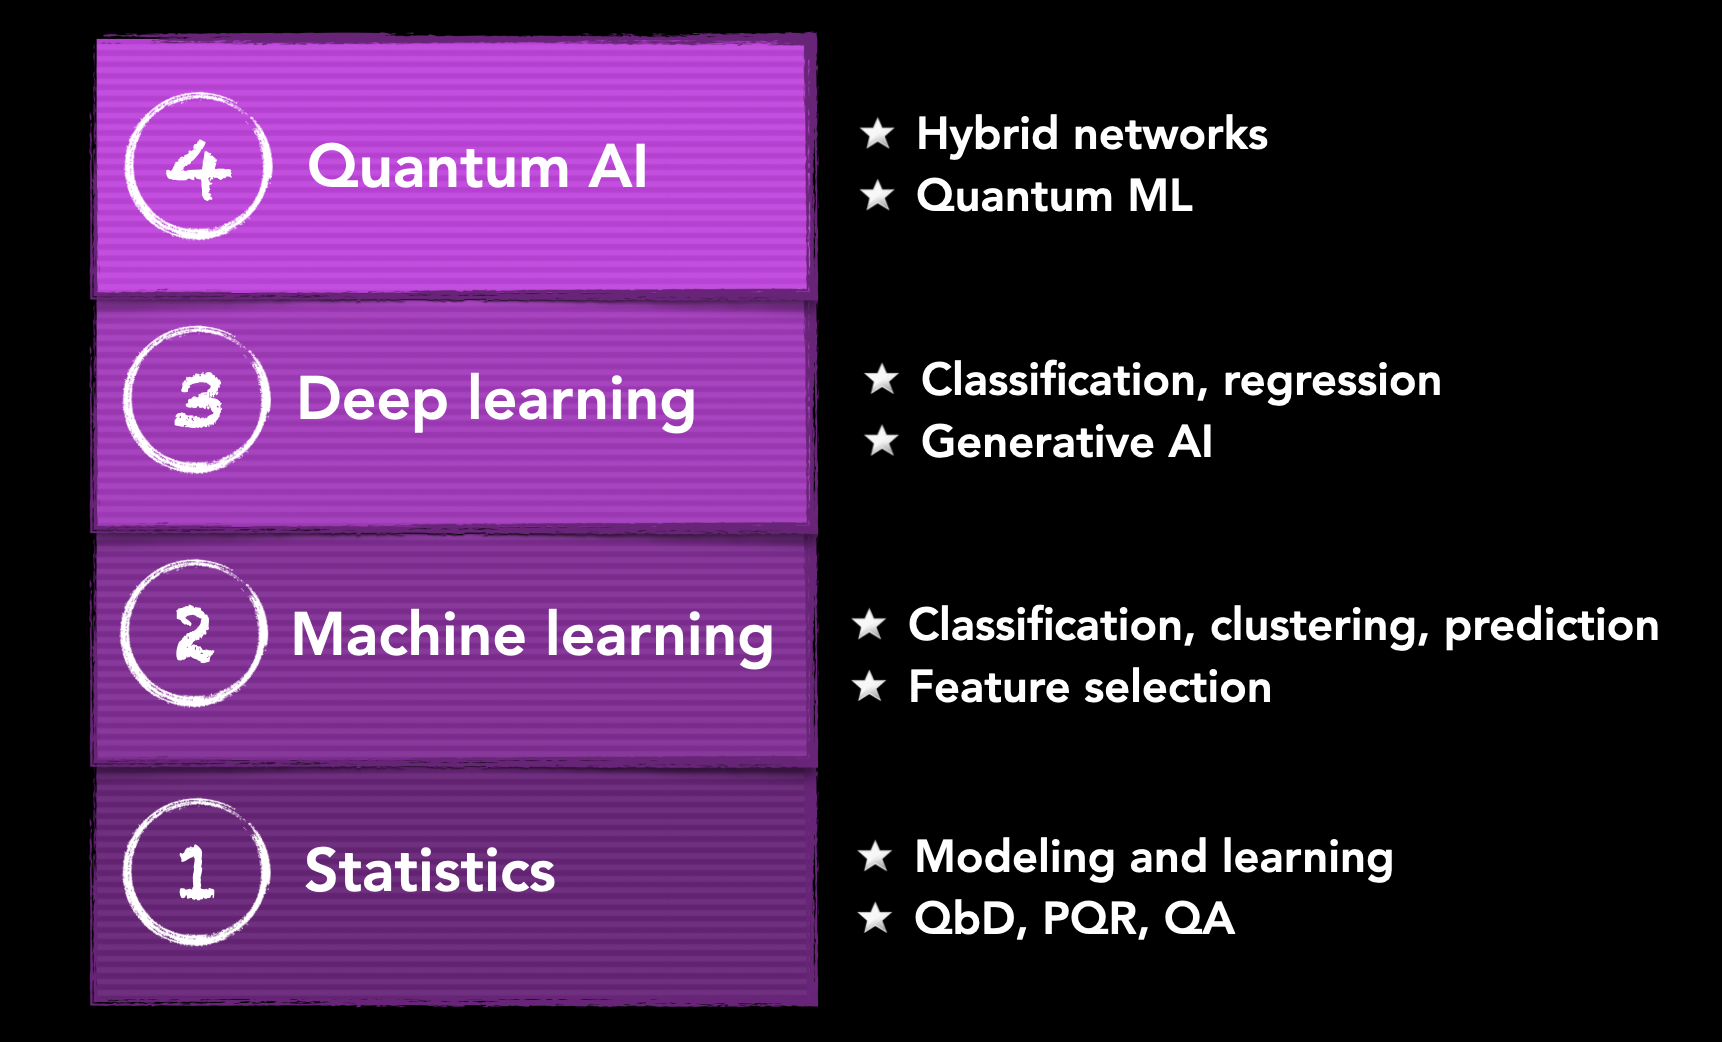 Apply Quantum AI - approach and skills